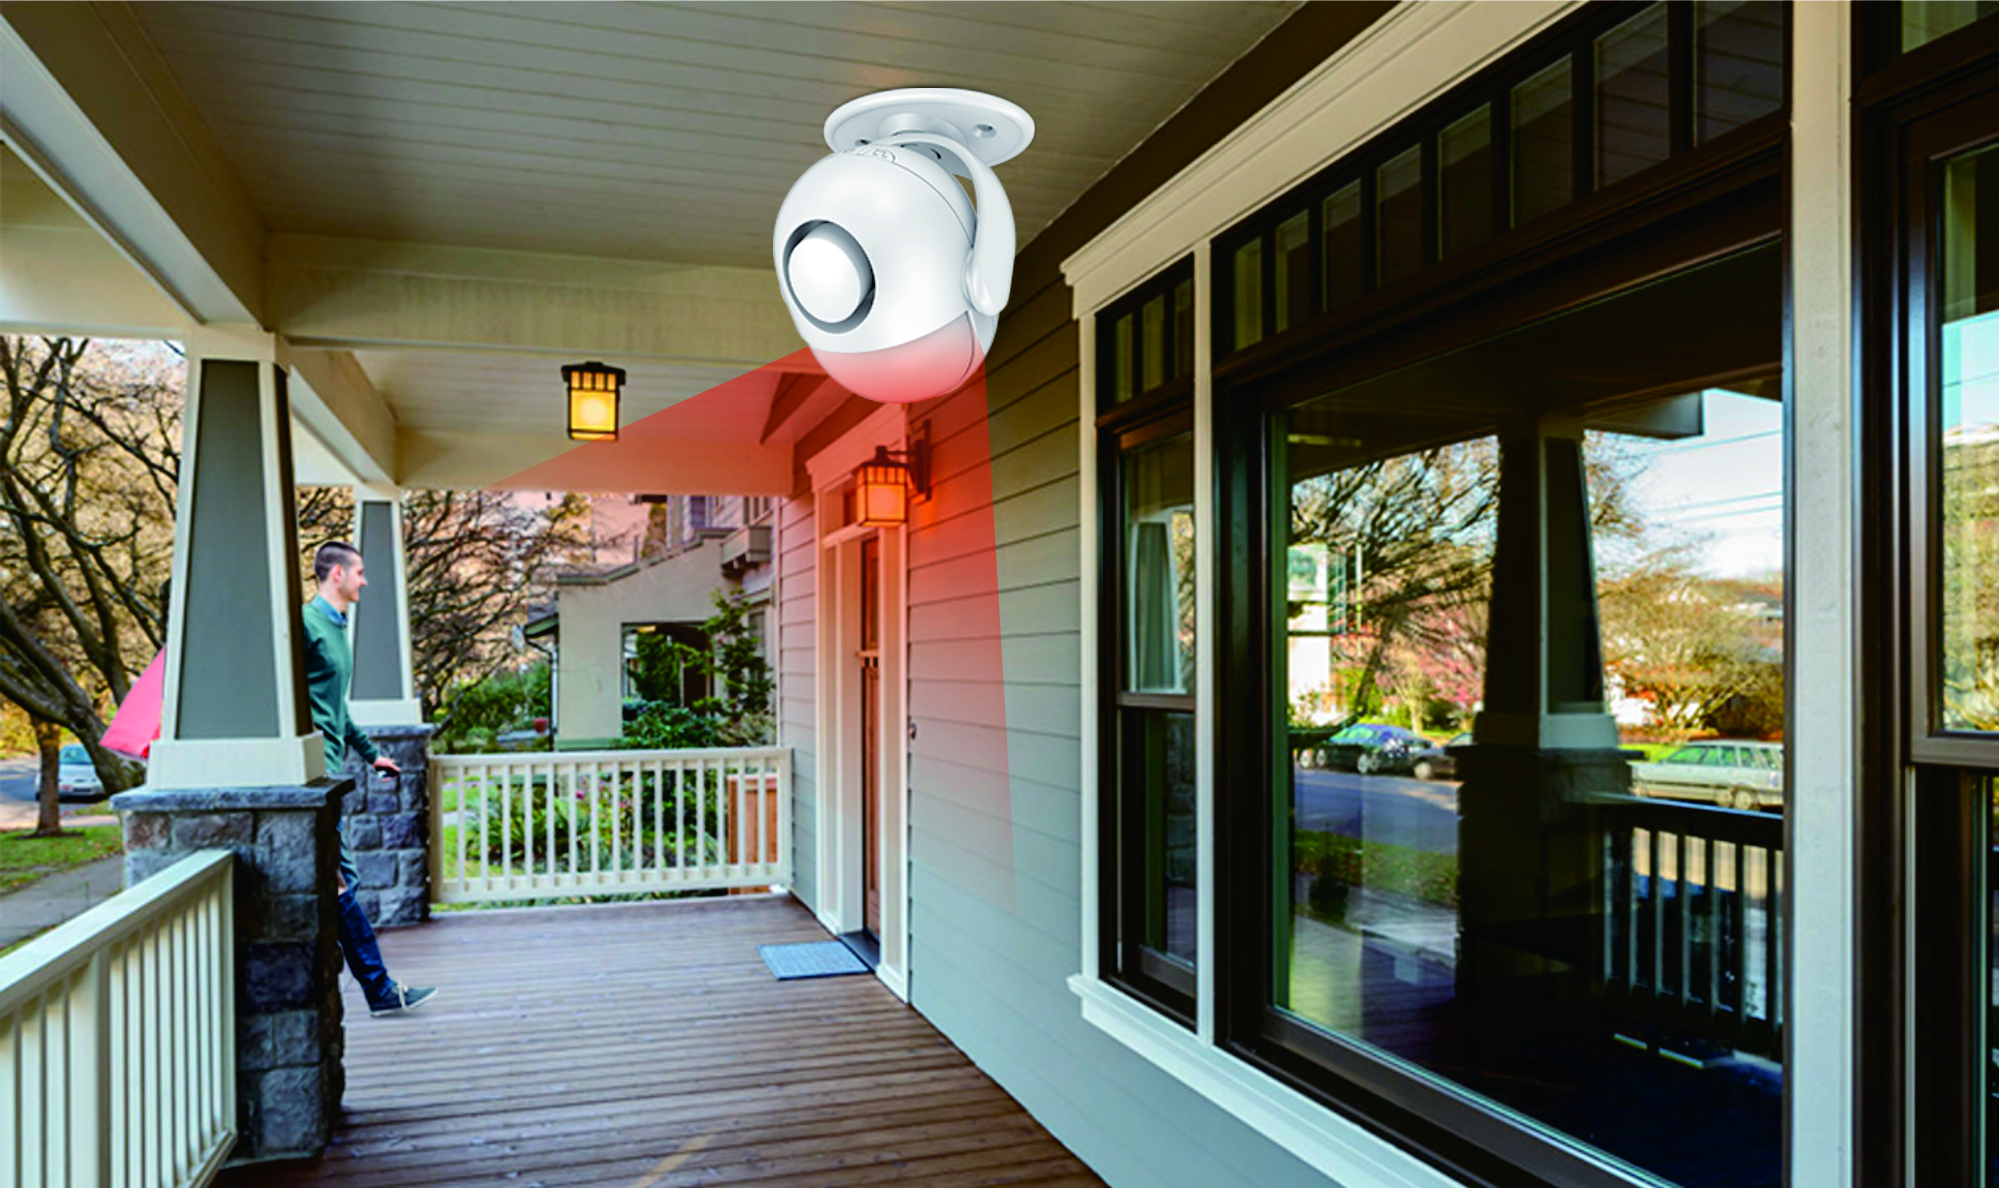 How Passive Infrared (PIR) Detectors Work in Home Security Systems